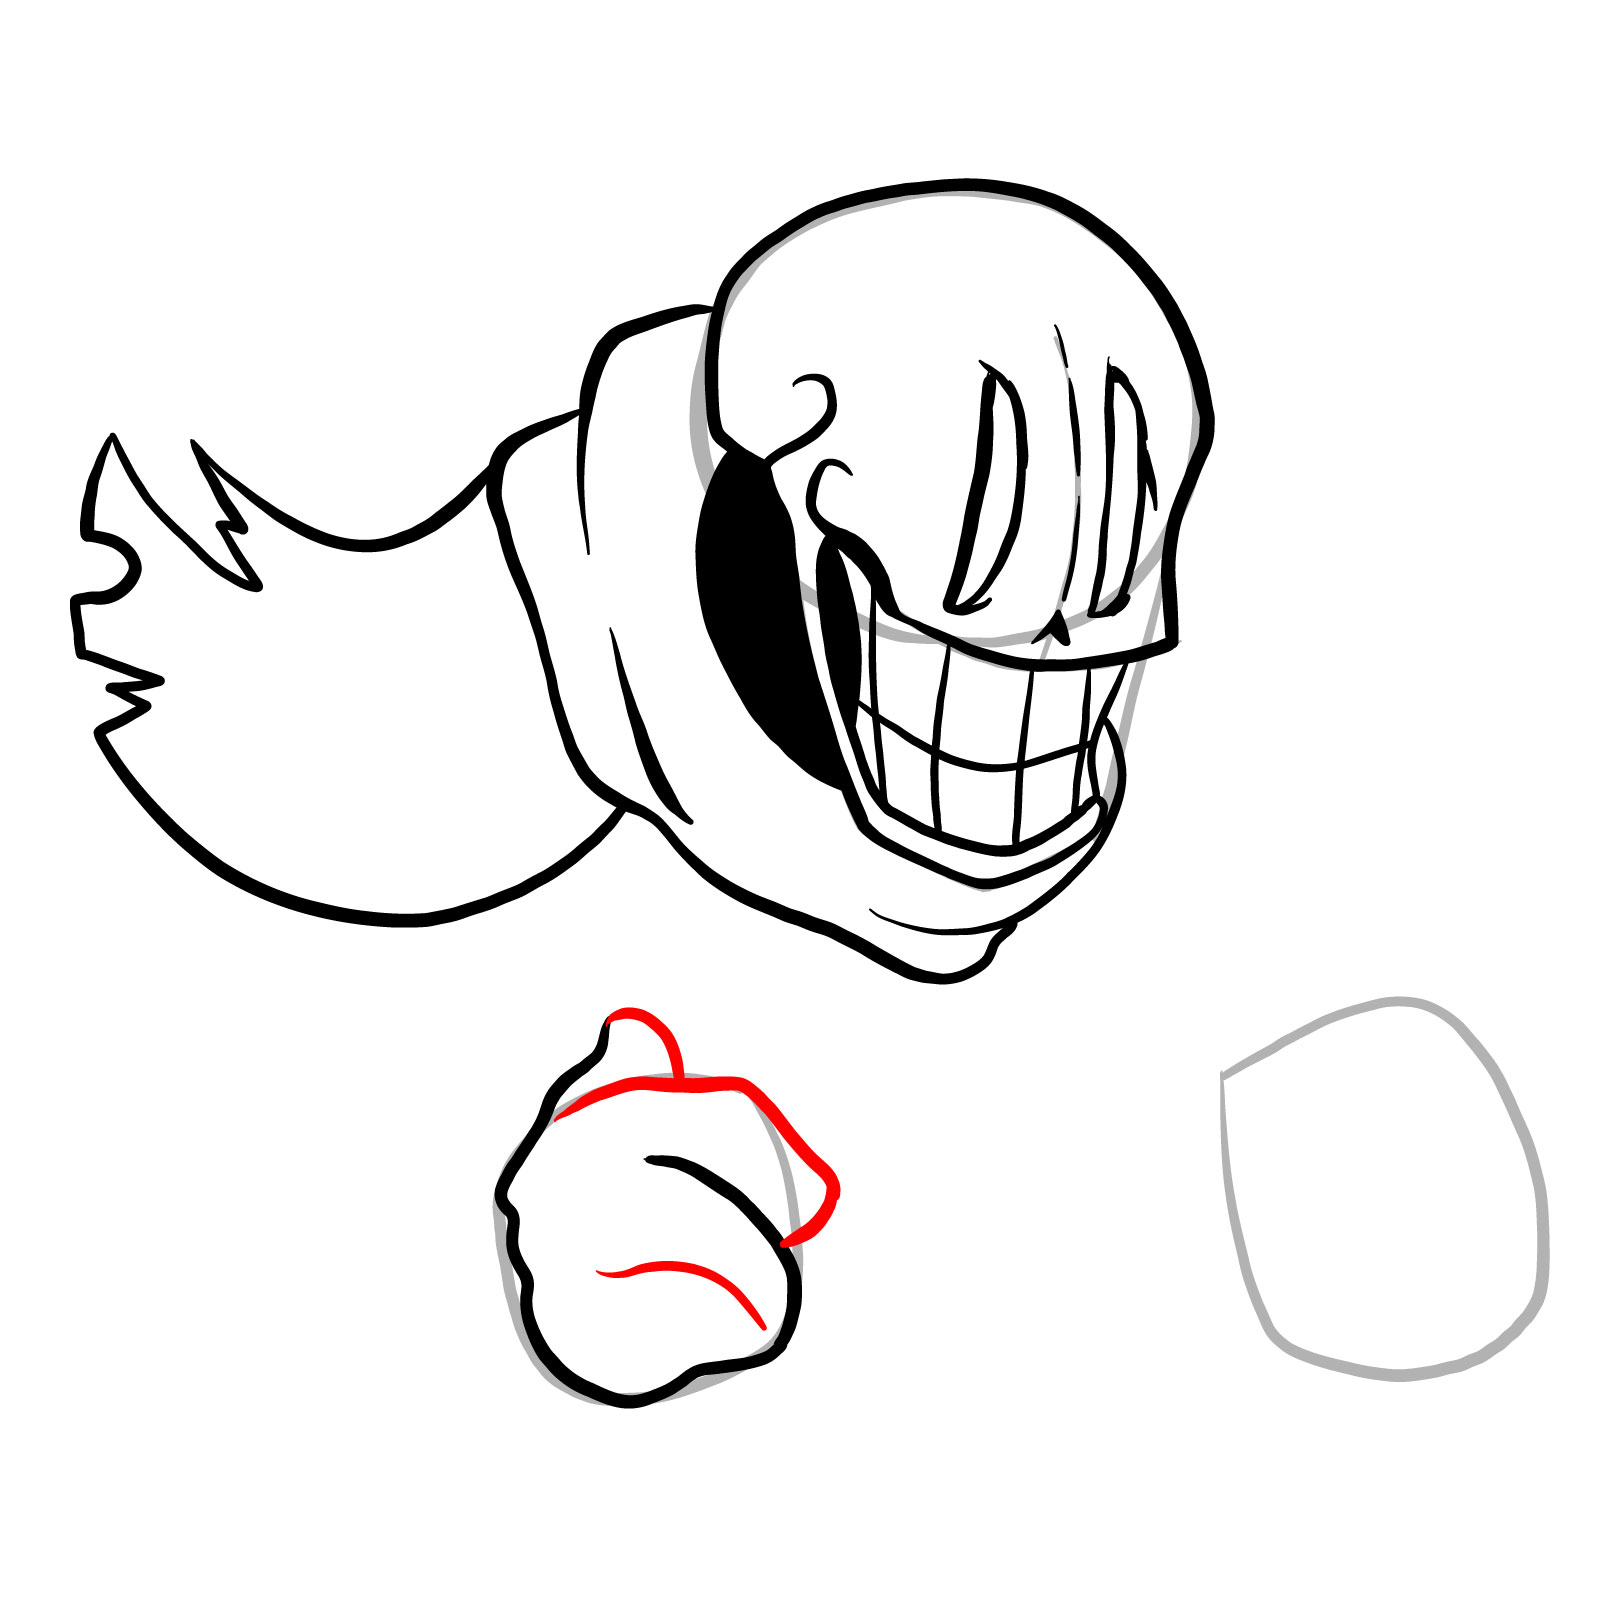 How to draw Phantom!Papyrus from FNF - step 17